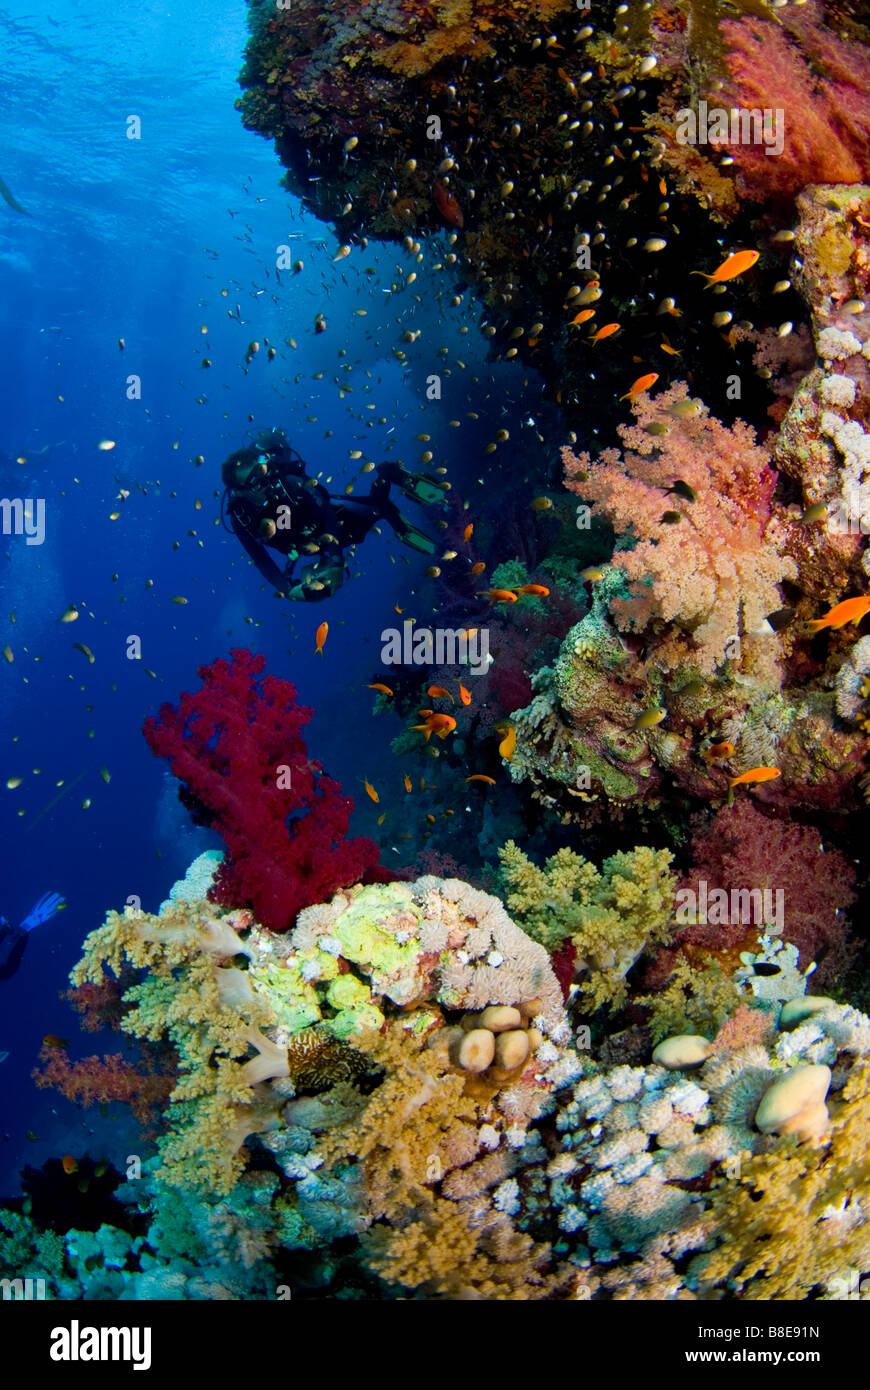 Scuba diver and coral reef around Brother Islands, Red Sea. Stock Photo